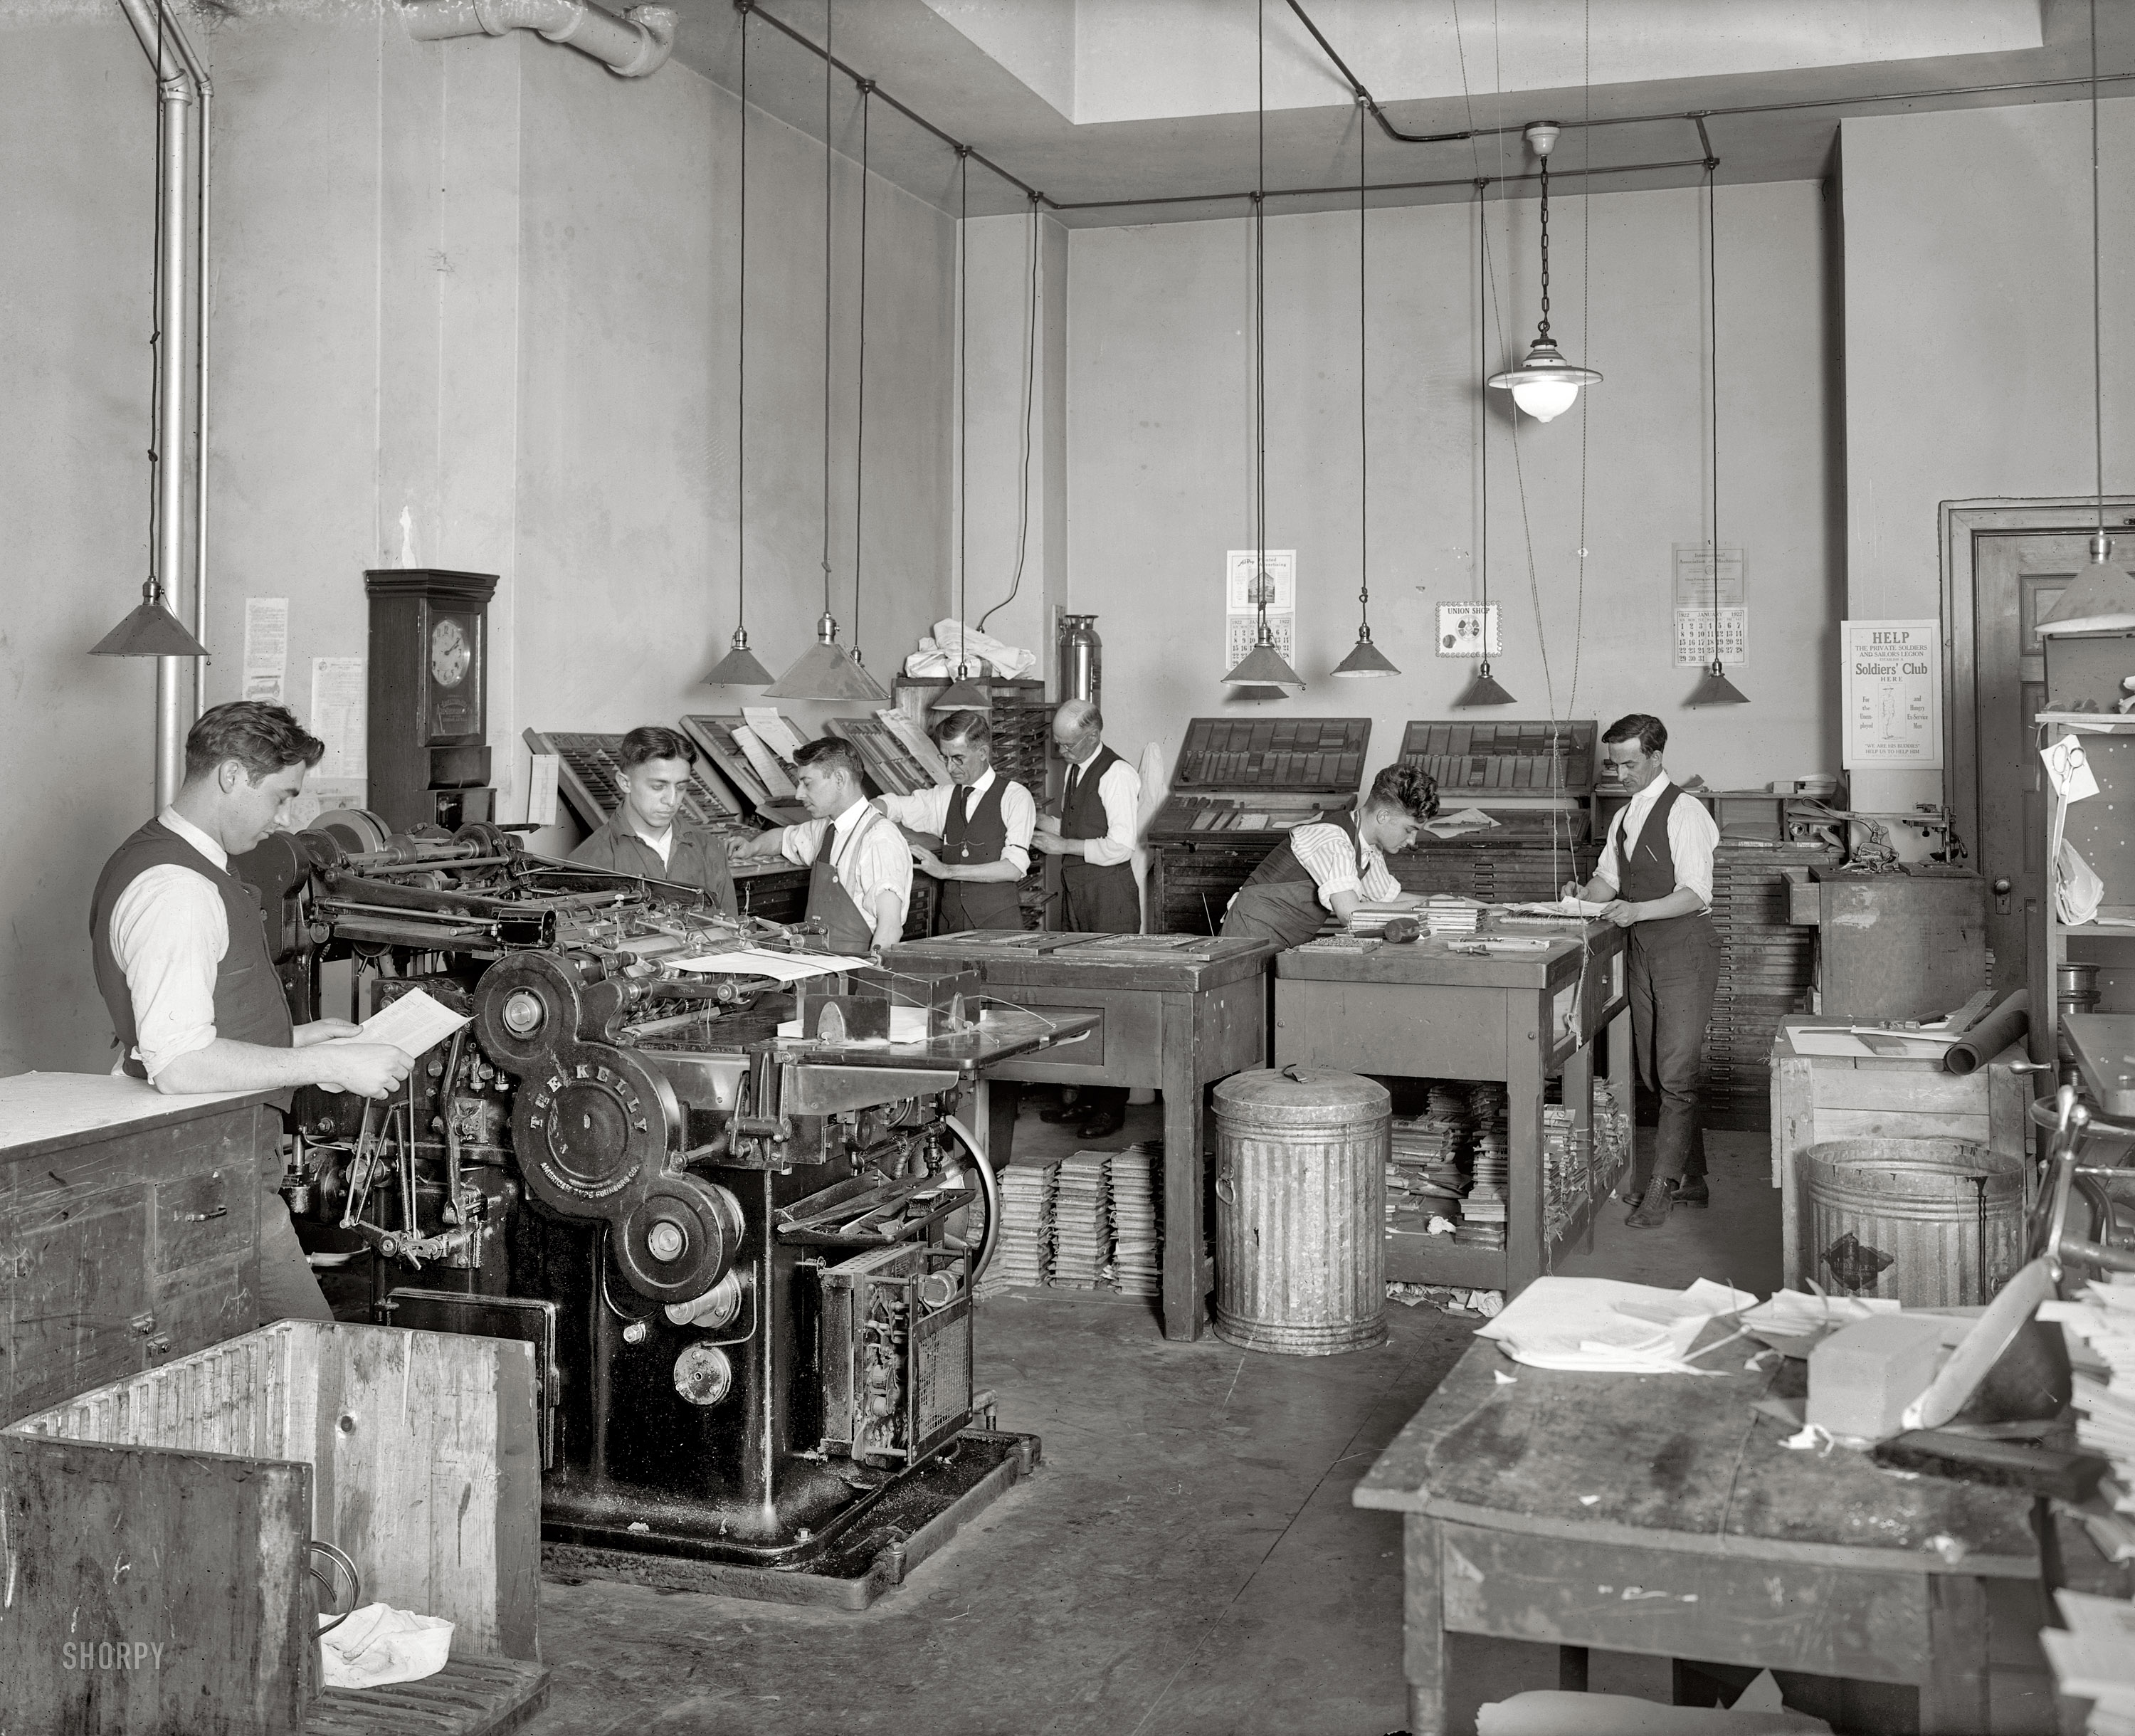 January 1922. Washington, D.C. "Machinists' Association, printers." Another peek behind the scenes at the International Association of Machinists. View full size.